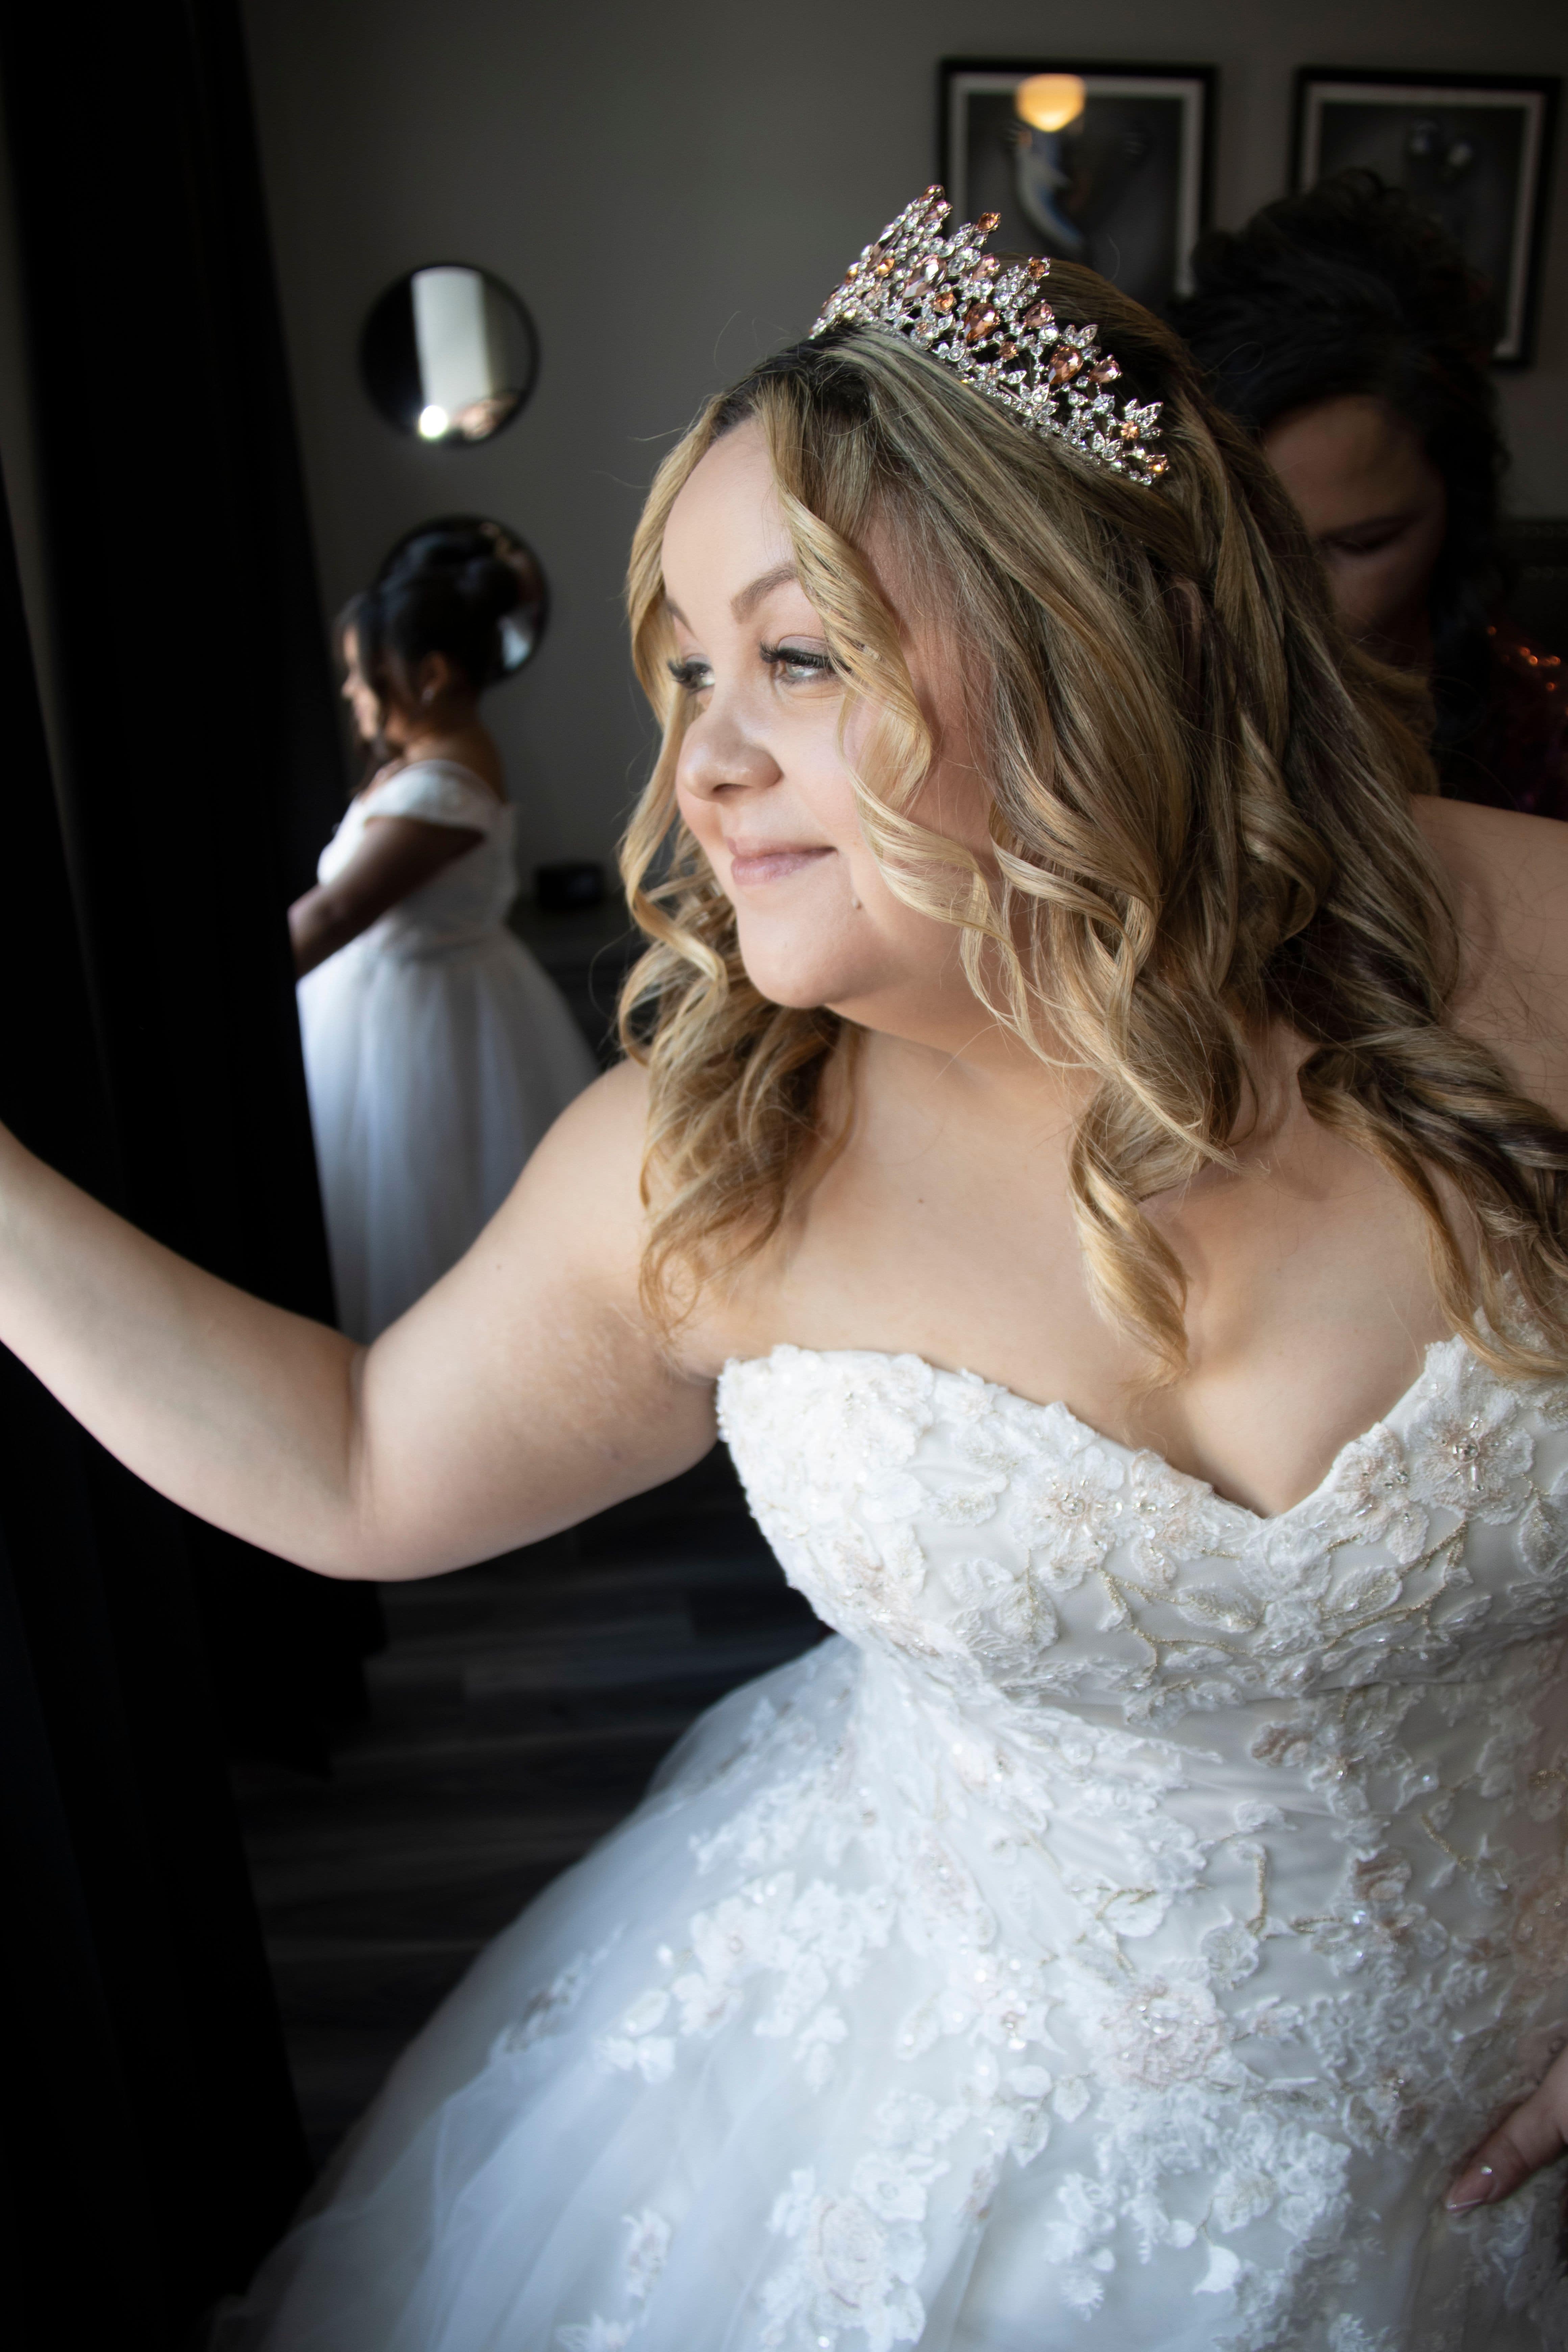 Bride Portraithotography by Angel C. at Tylerstar Productions